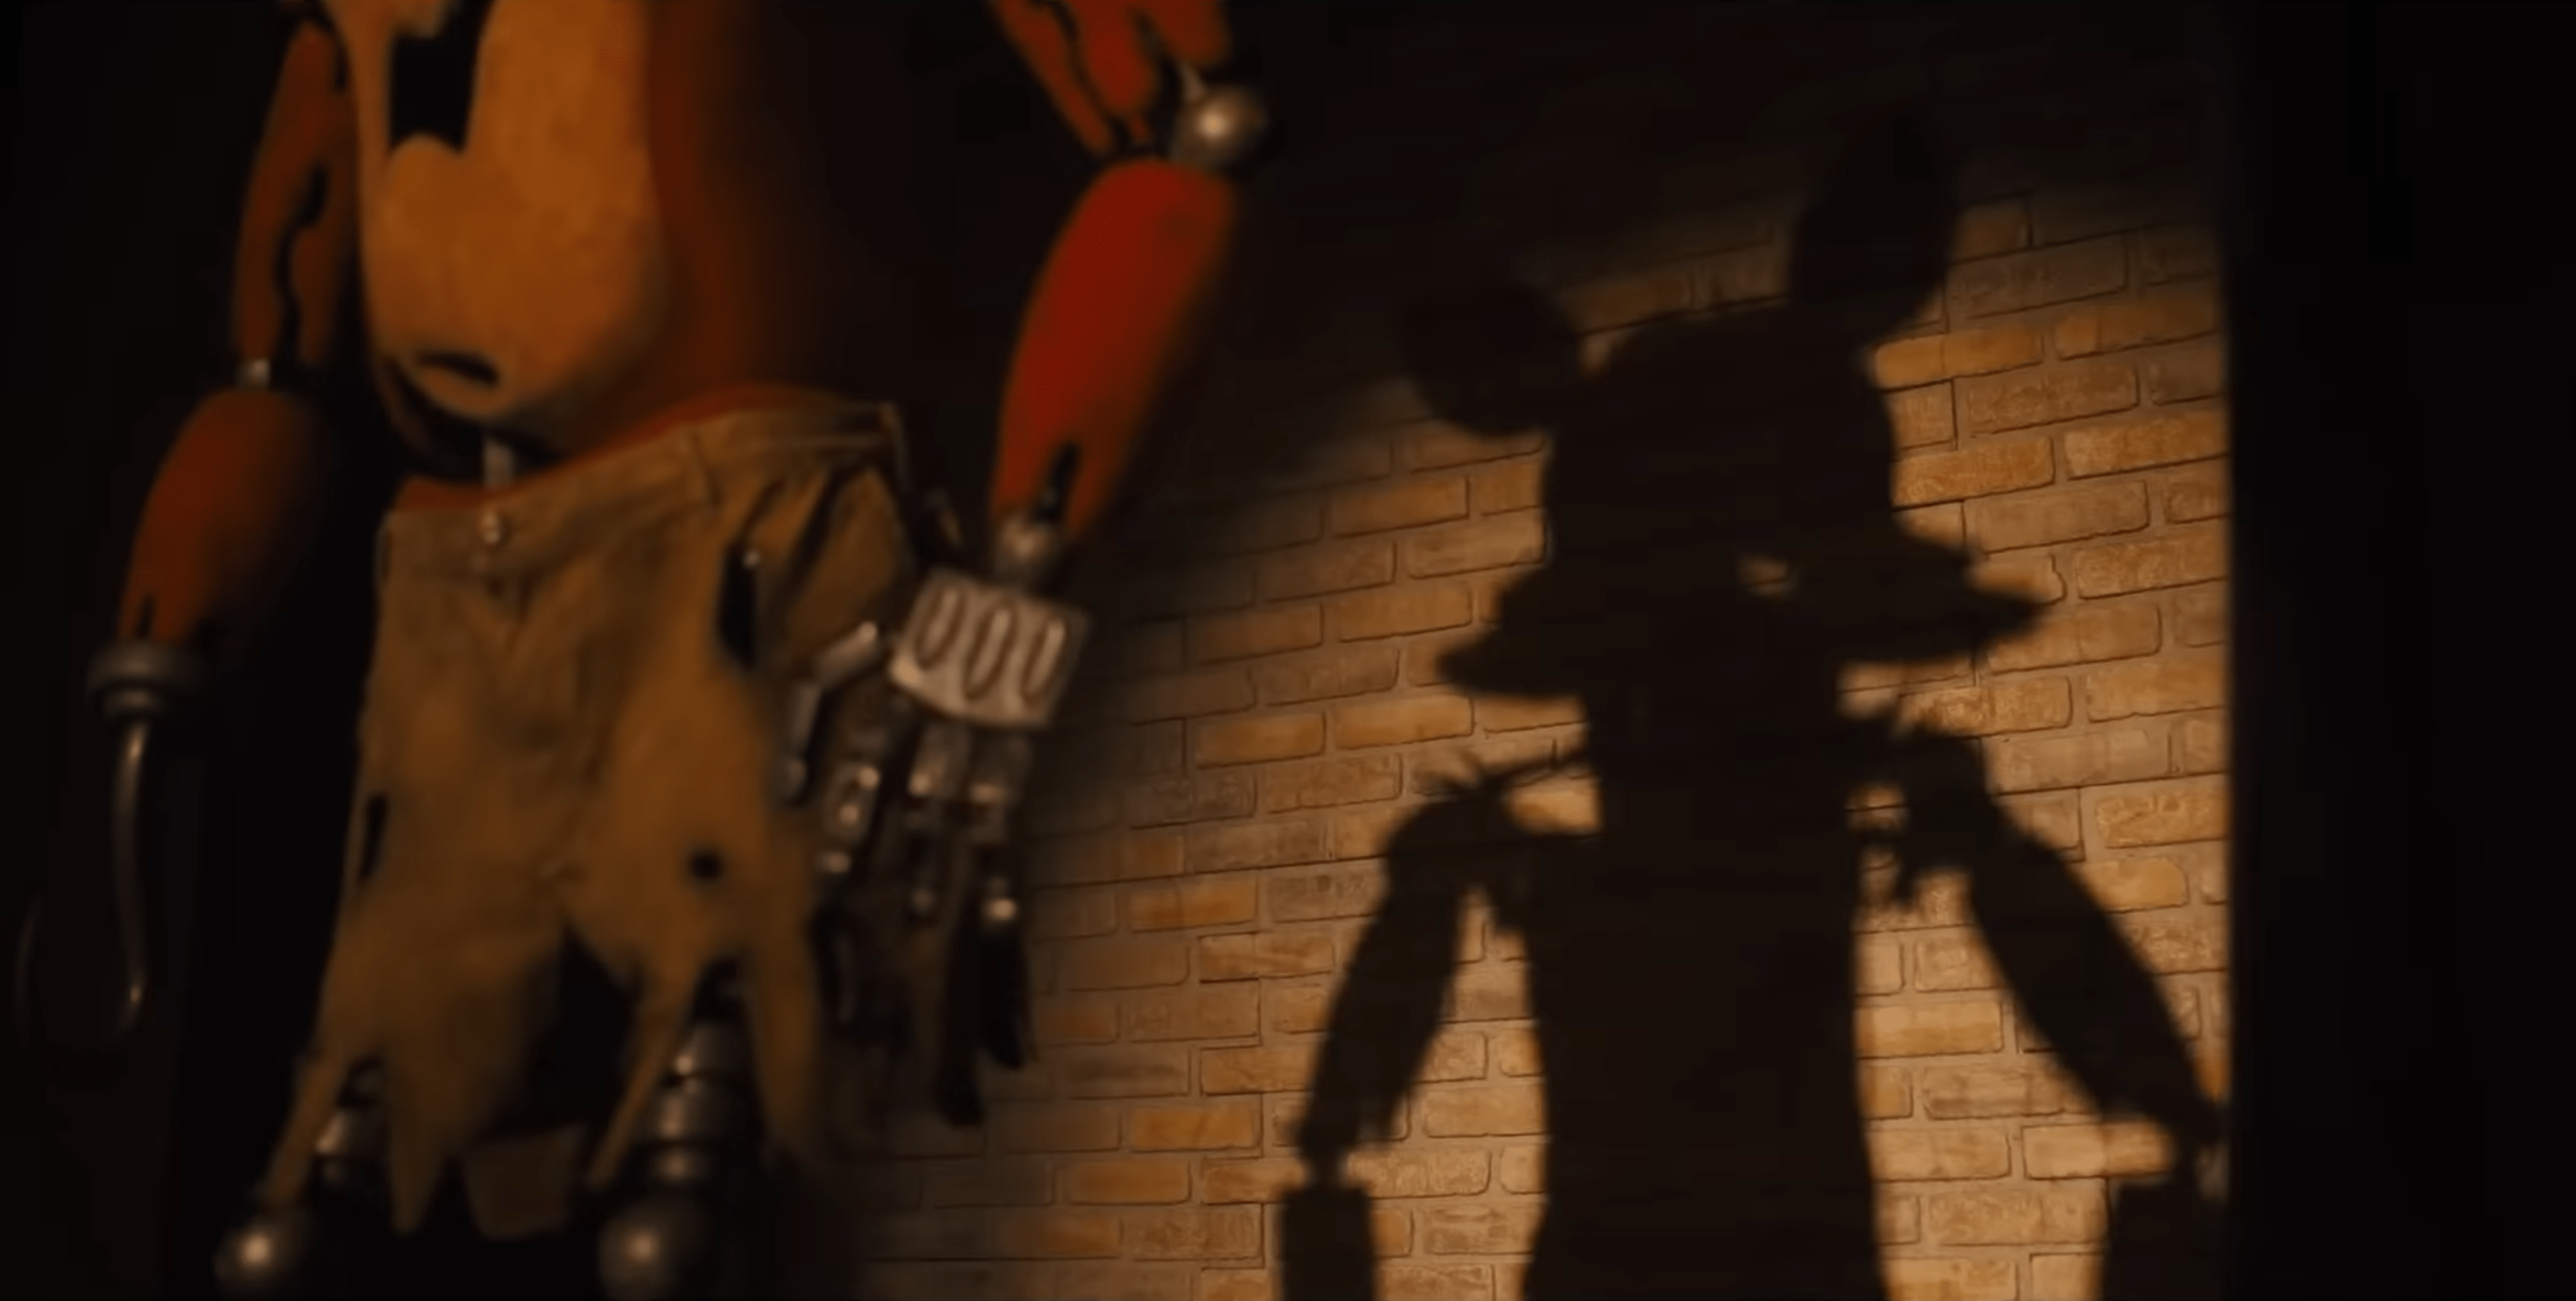 Is the character on the right monitor Shadow Freddy in the movie